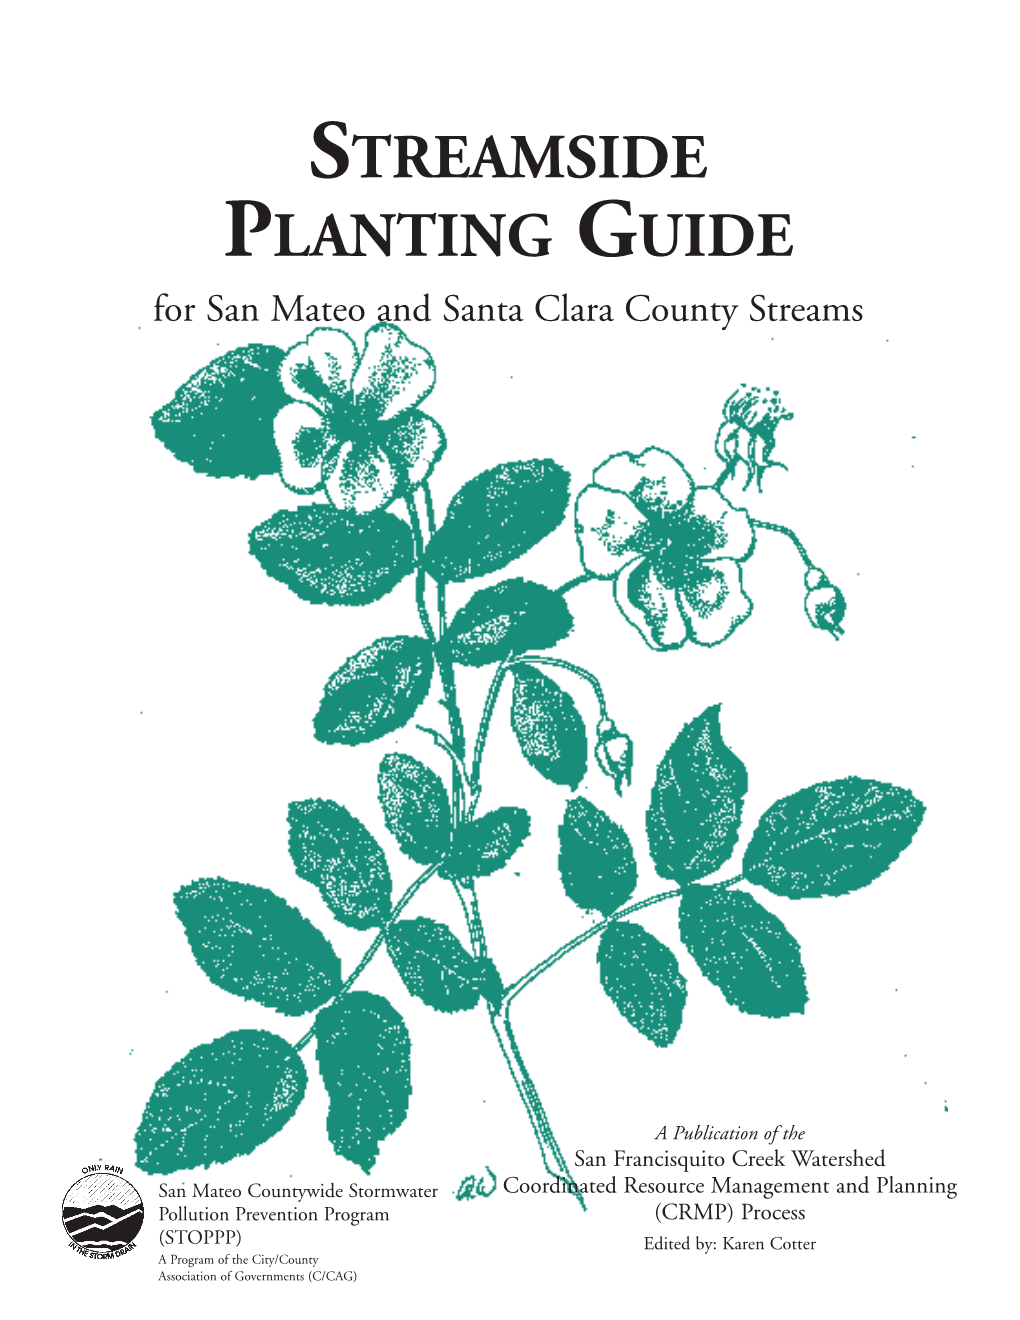 Where to Find Native Plants